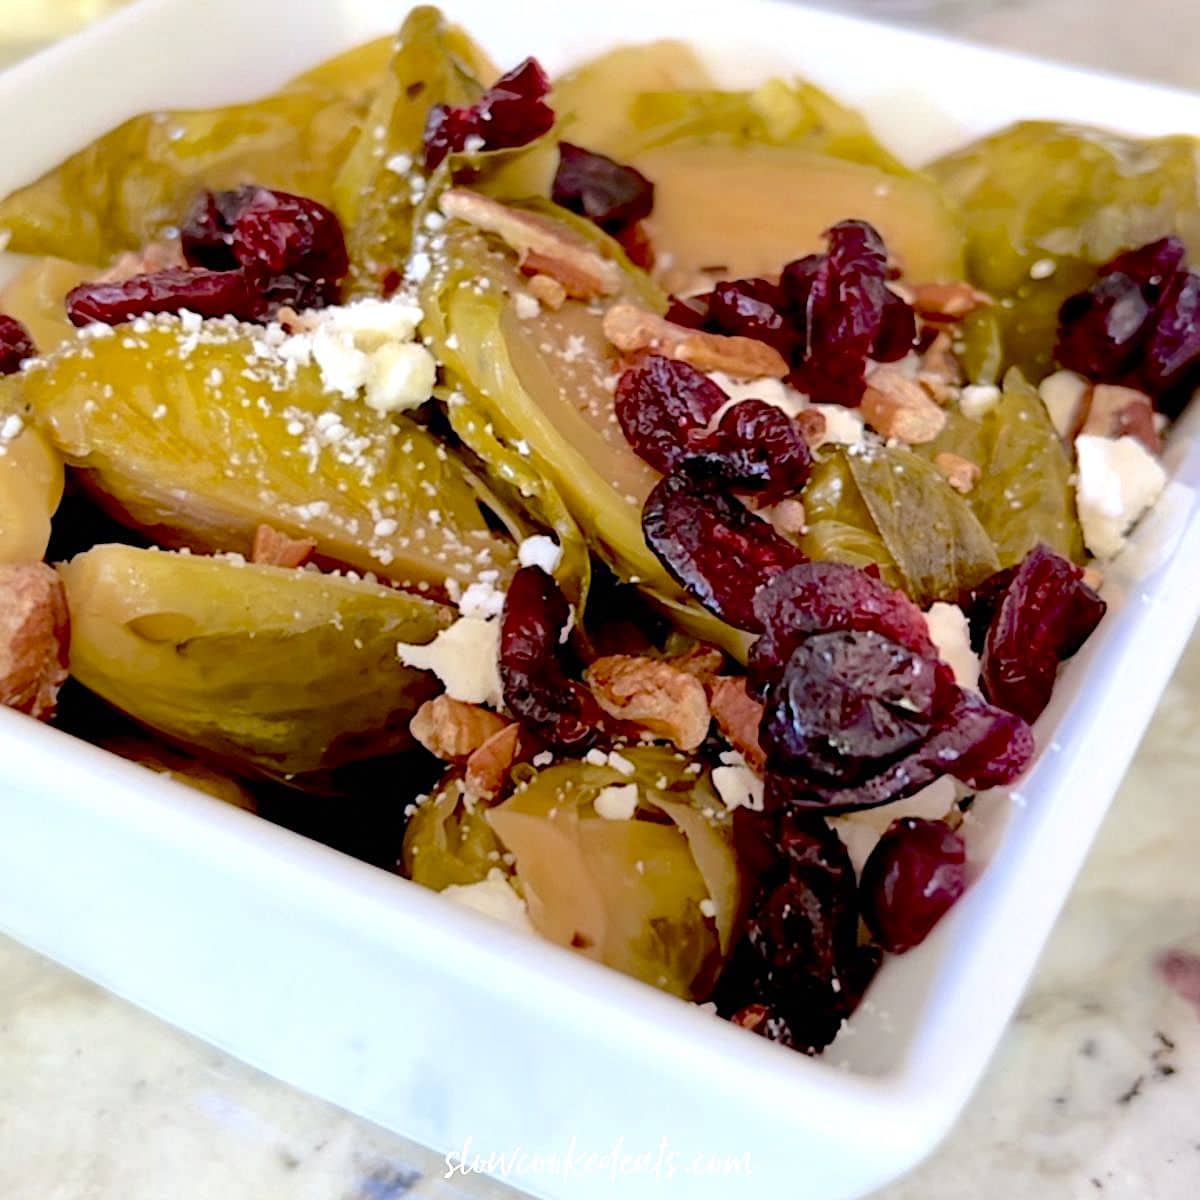 Topping brussel sprouts with cranberries, goat cheese, and walnuts.